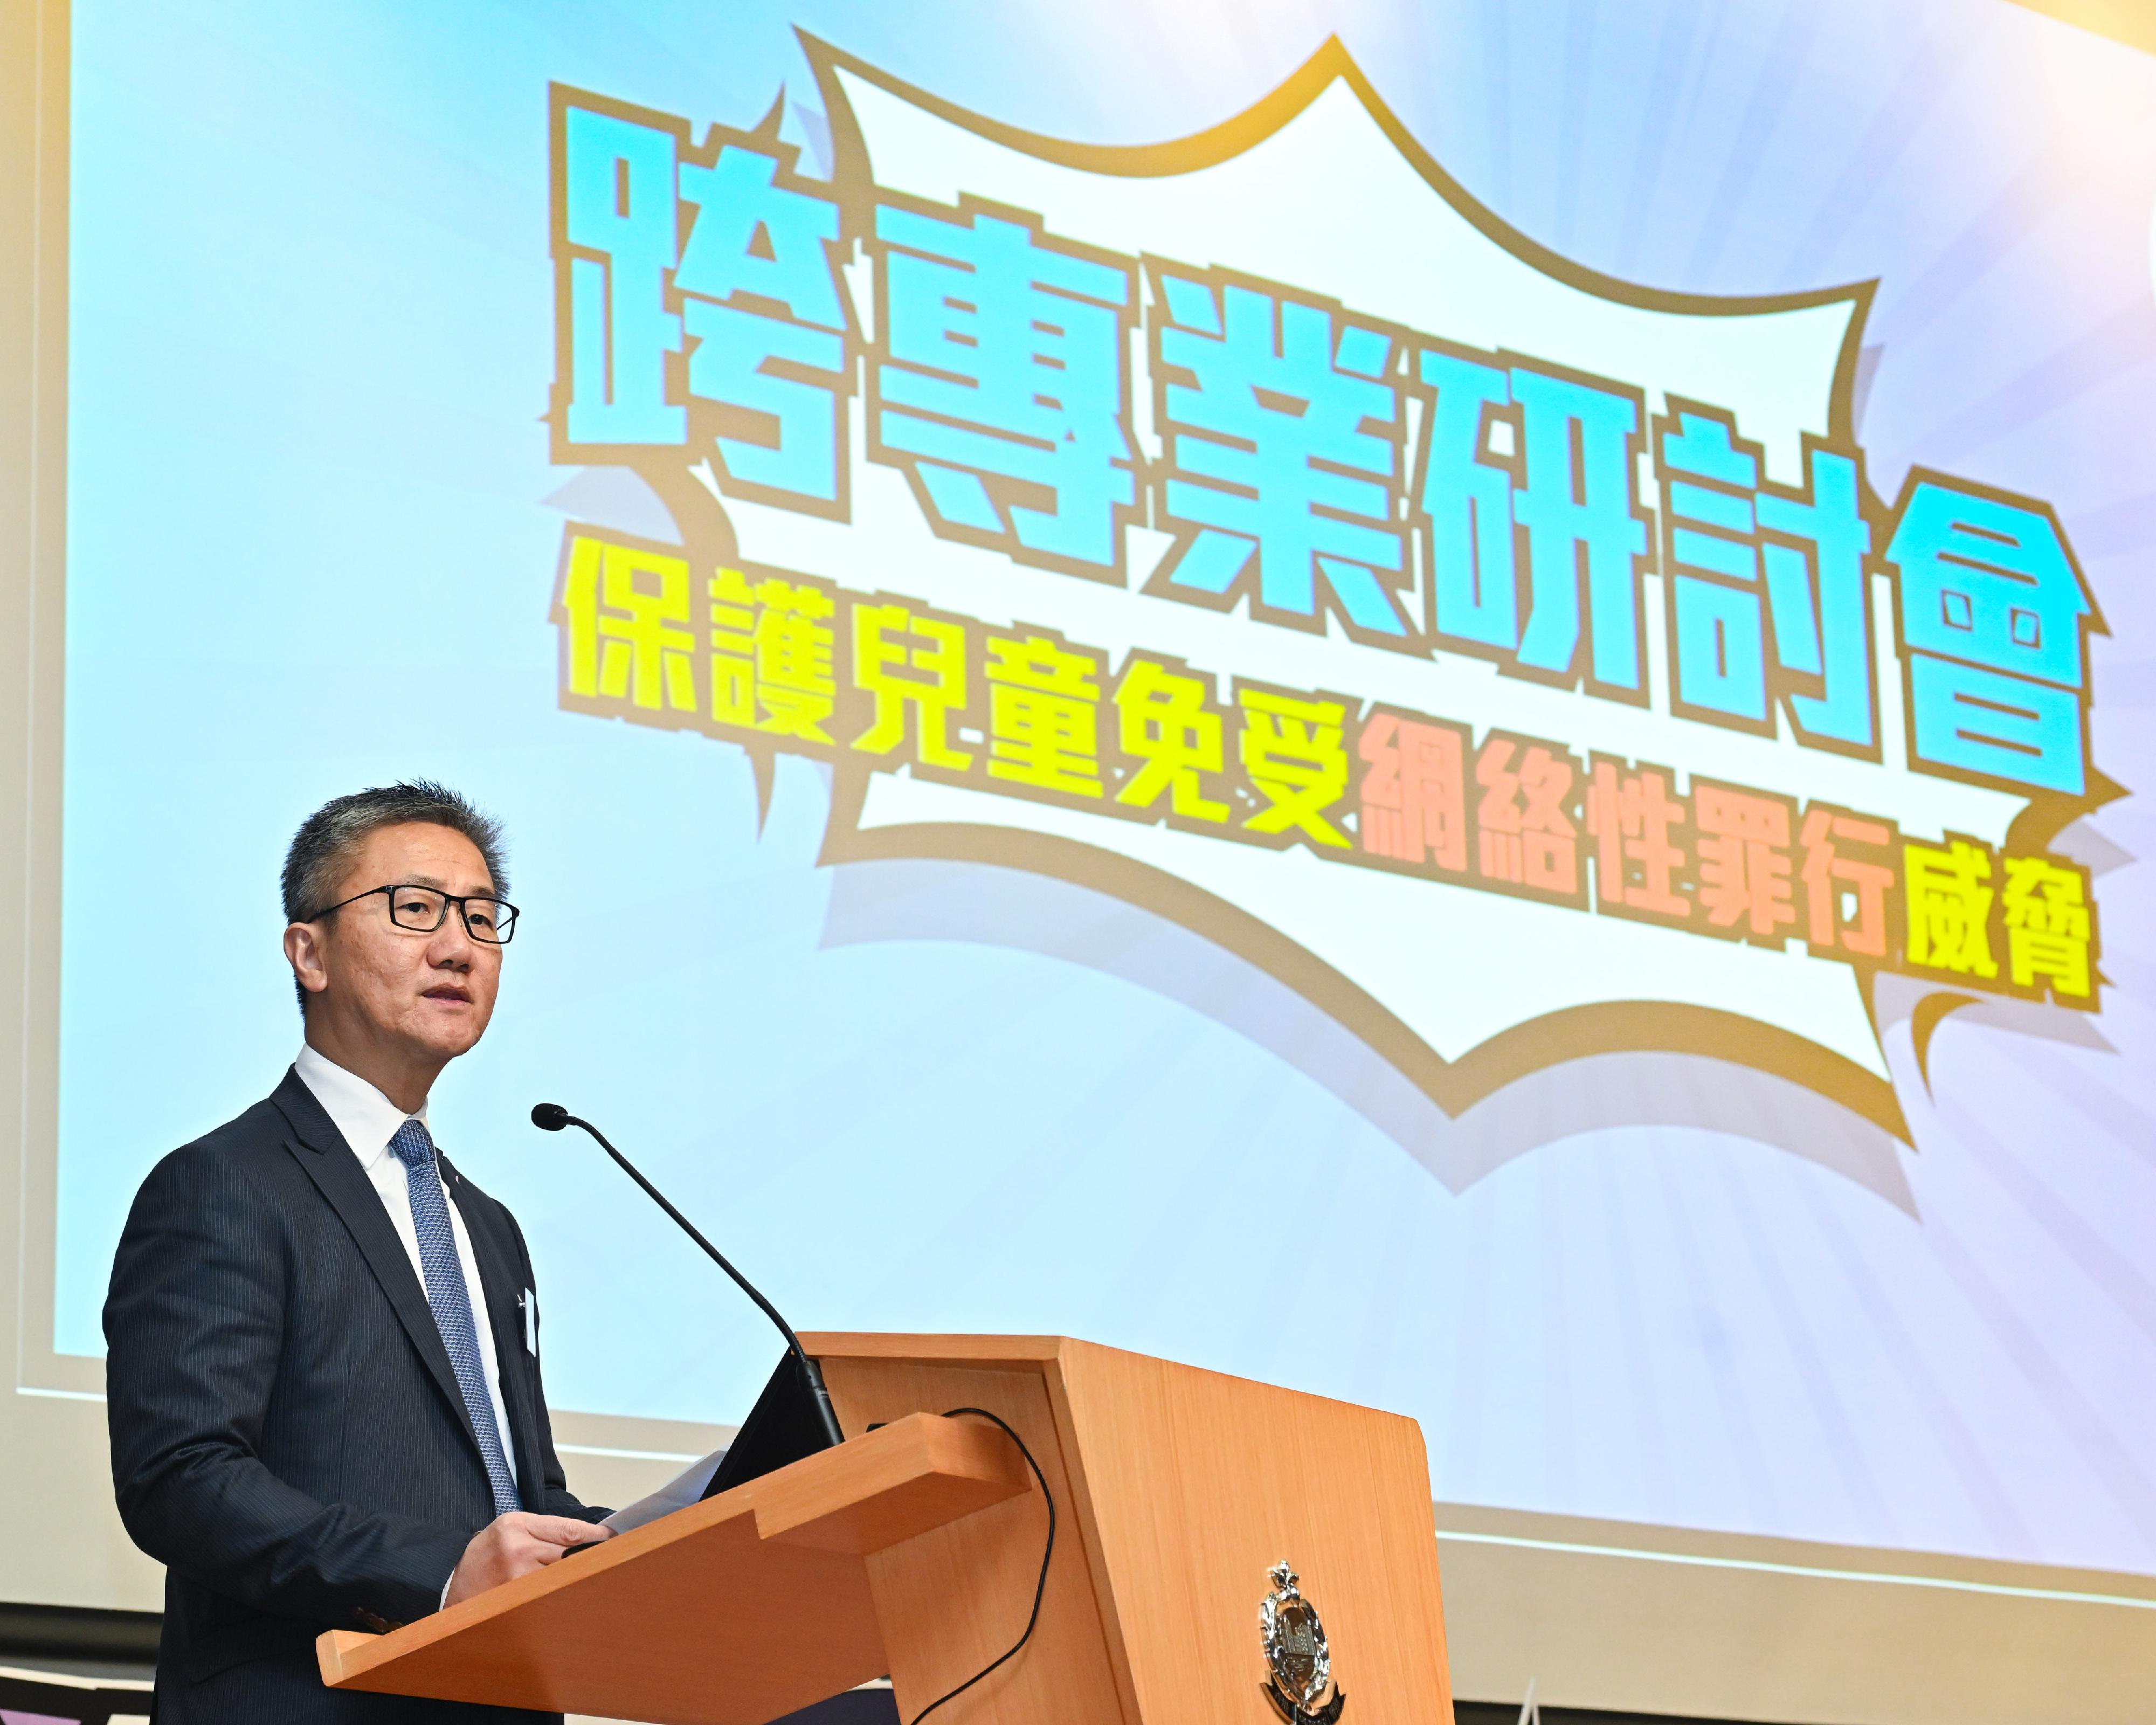 The Hong Kong Police Force (HKPF) held a multi-disciplinary seminar on Child Sexual Abuse in the Cyber World today (March 21). Photo shows the Commissioner of Police, Mr Siu Chak-yee, delivering a speech at the seminar.